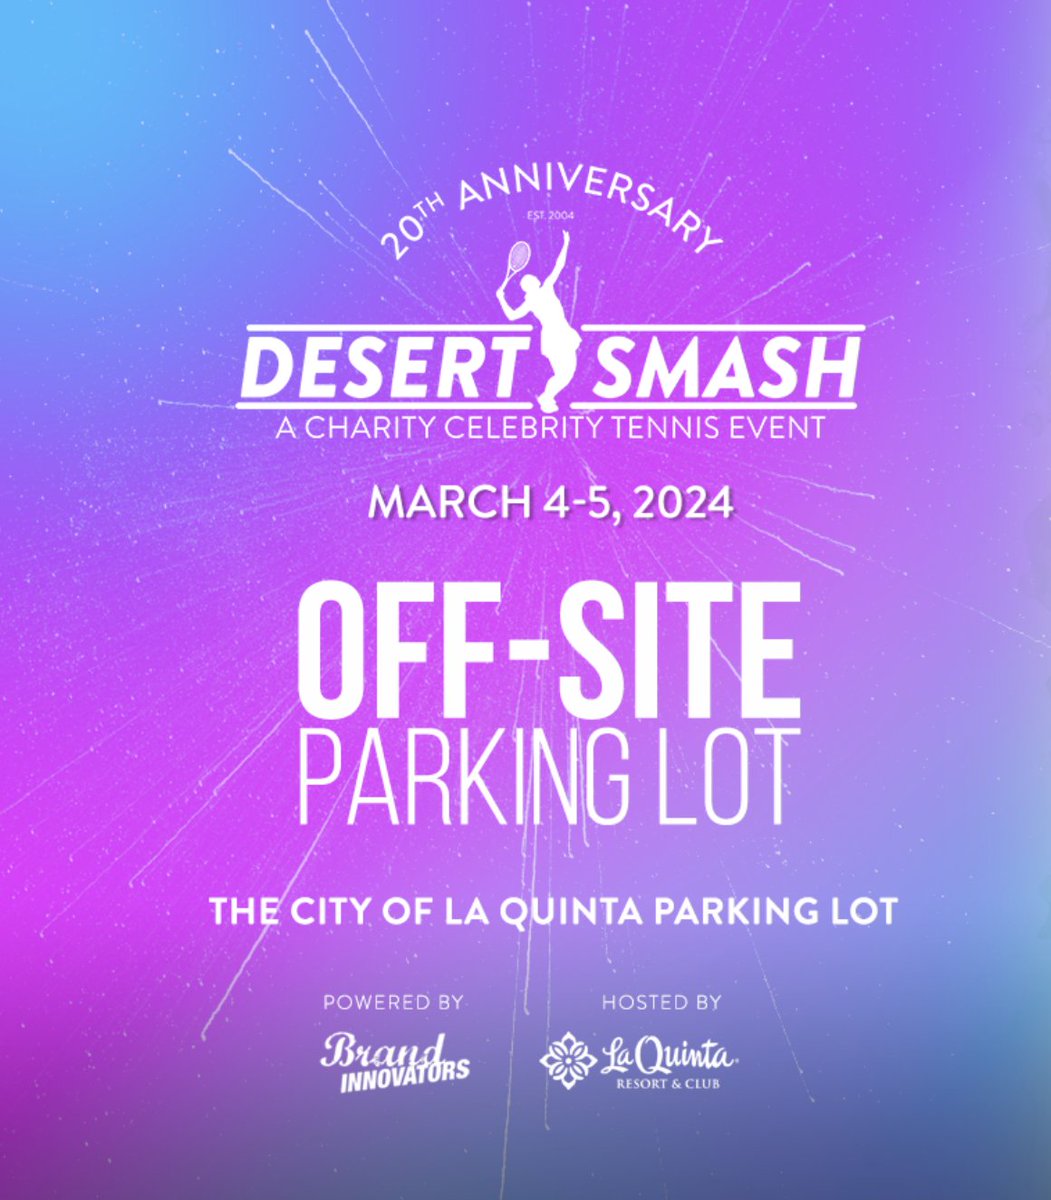 REMINDER: Guests who are not staying at the La Quinta Resort will have access to complimentary off-site parking with a shuttle bus taking guests to and from La Quinta Resort every 15-20 minutes. Guests are advised to arrive early. Please see map and address. Parking Lot